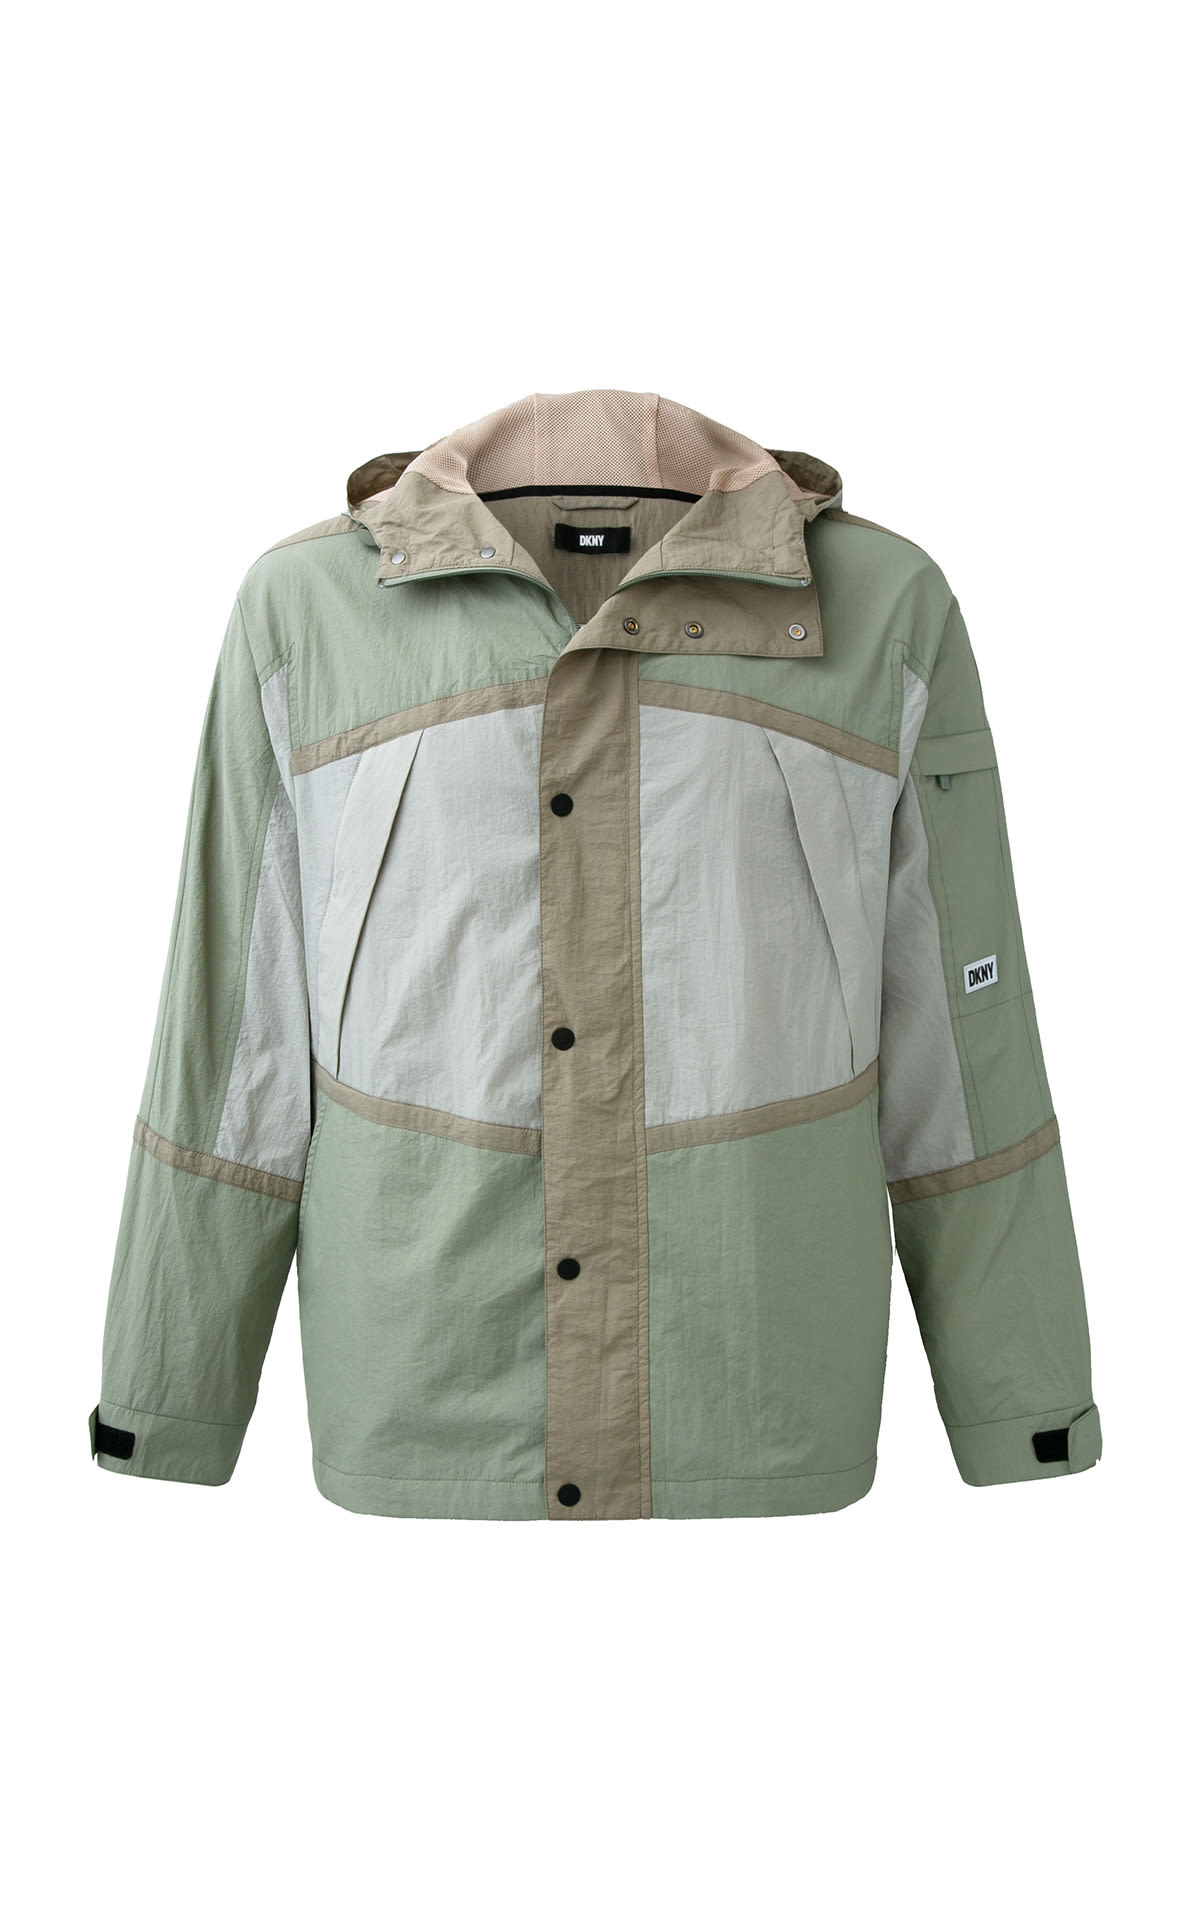 DKNY Multi-color pieced hike jacket from Bicester Village